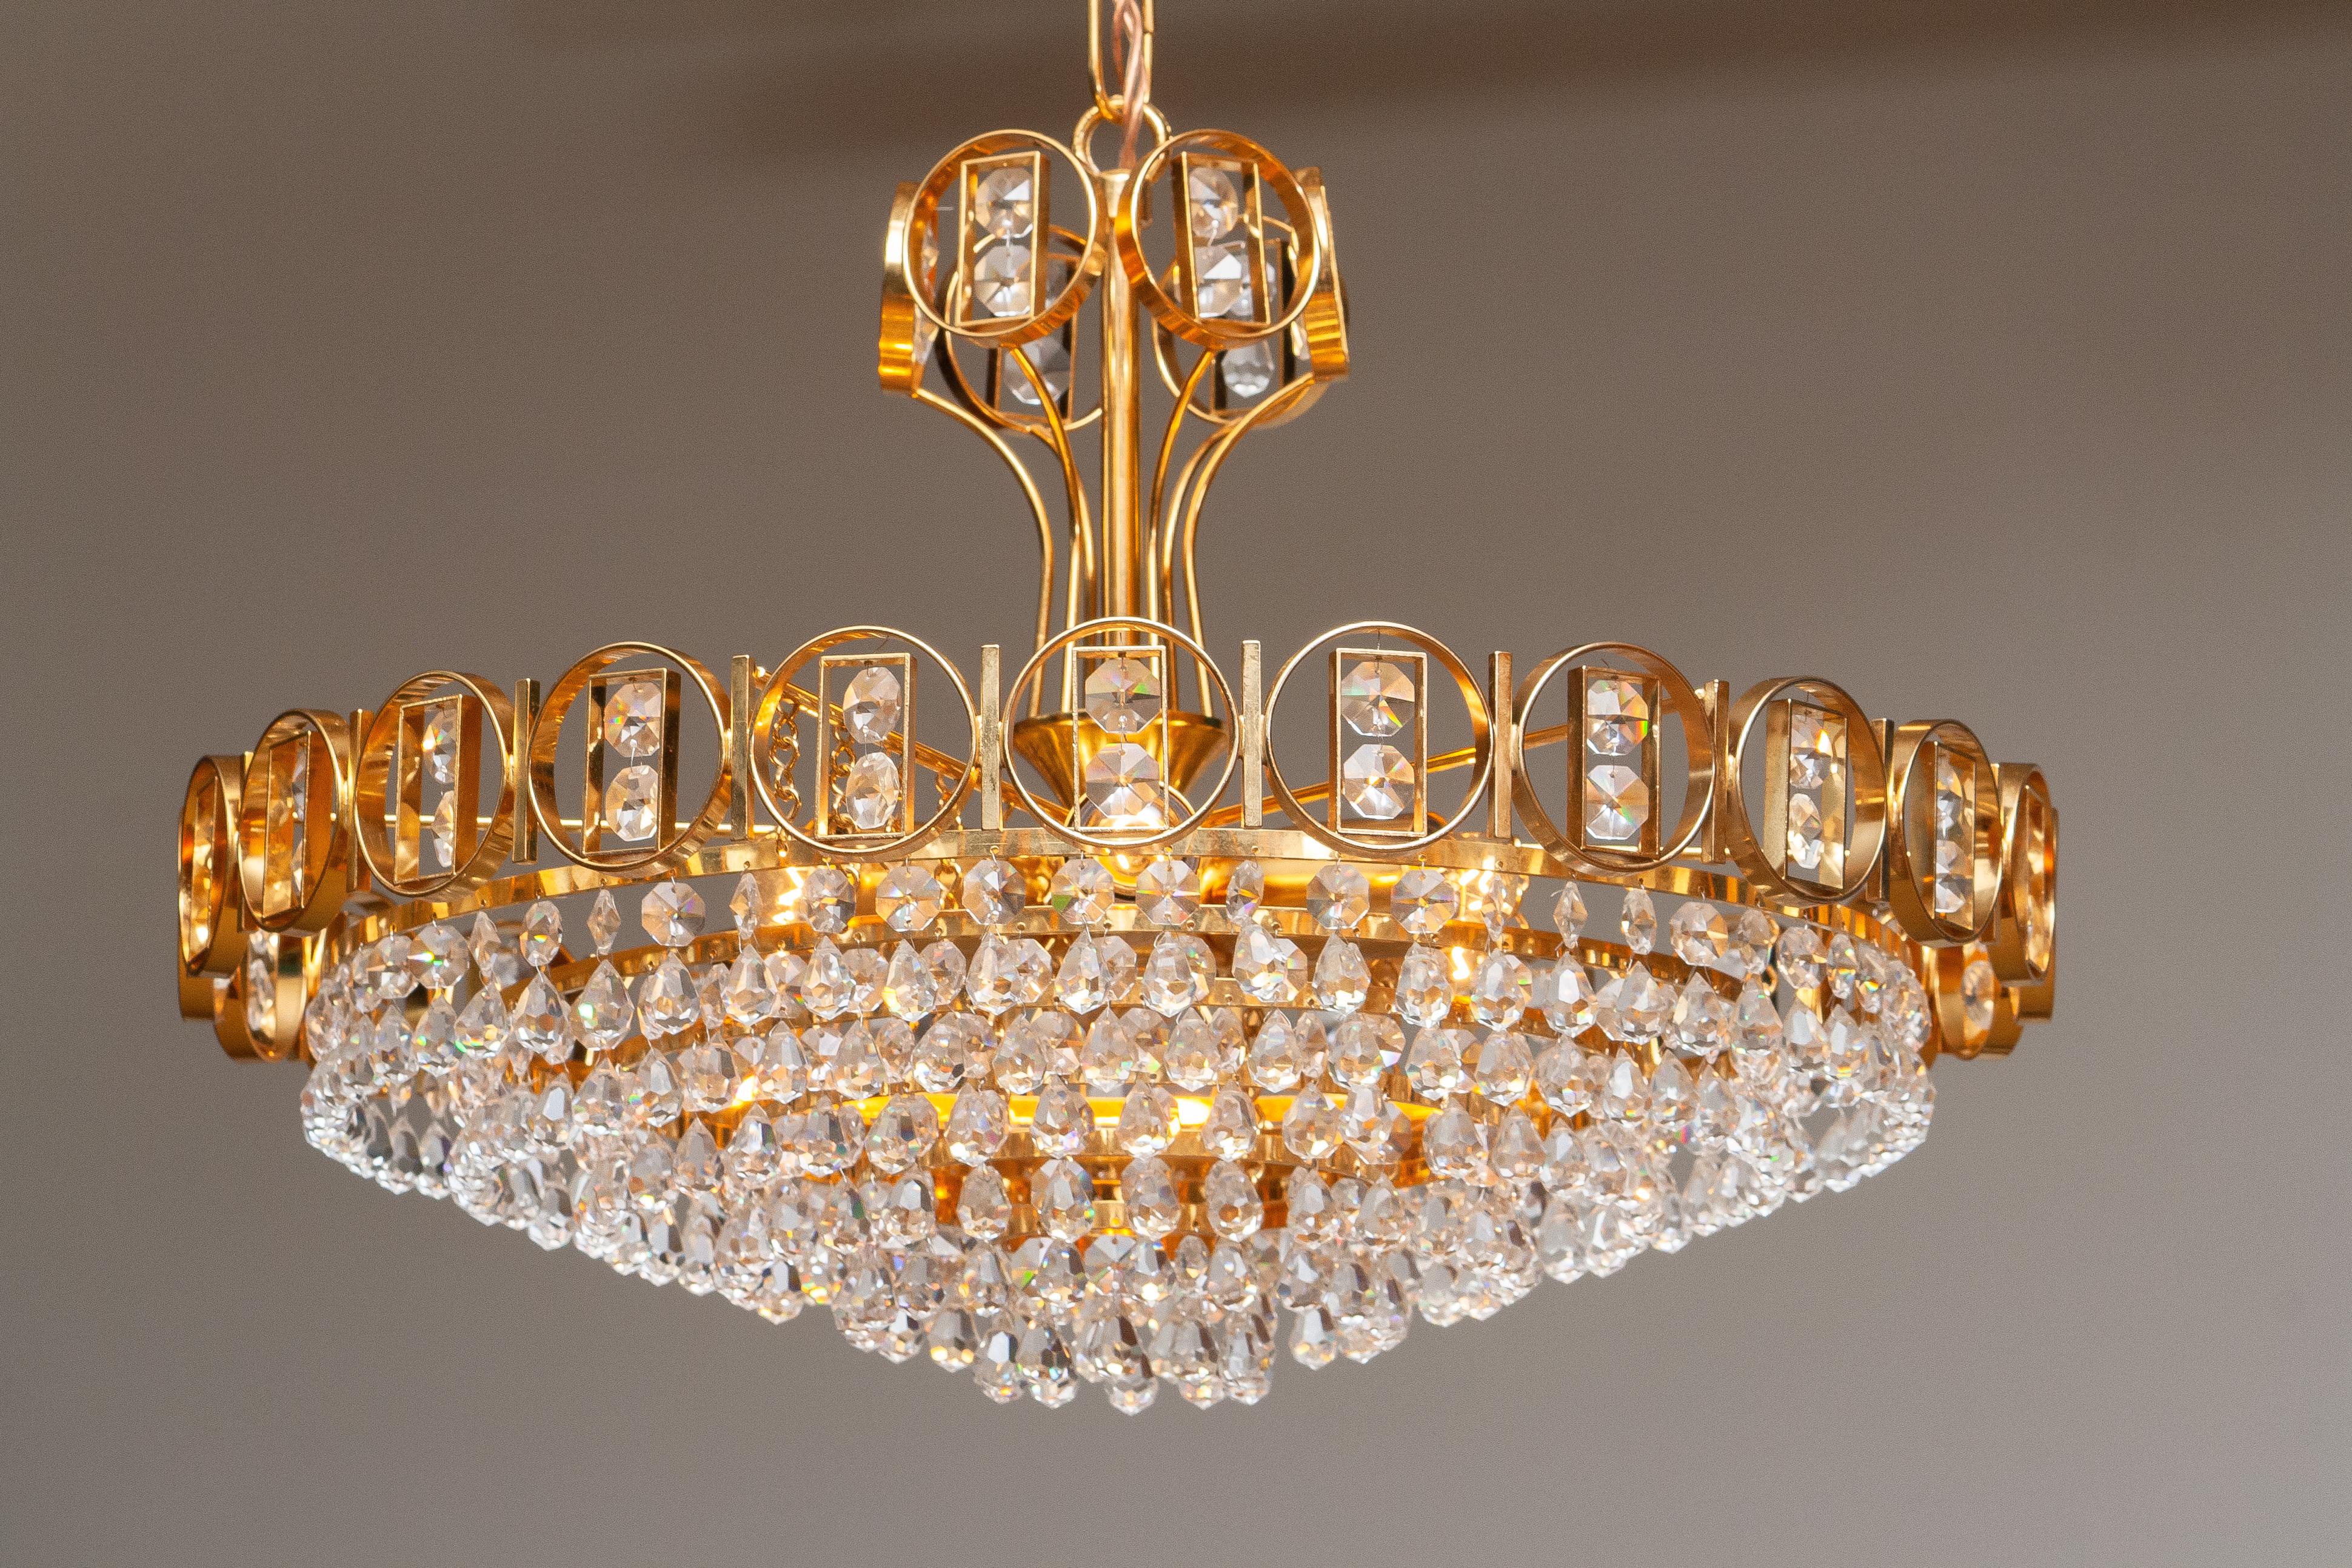 Beautiful brass gilded chandelier filed with faceted crystals made by Palwa Germany 1970.
This chandelier consist out of a gold plaited crown with inside six gold plaited rings filed with crystals and on top also a smaler gold plaited crown.
There